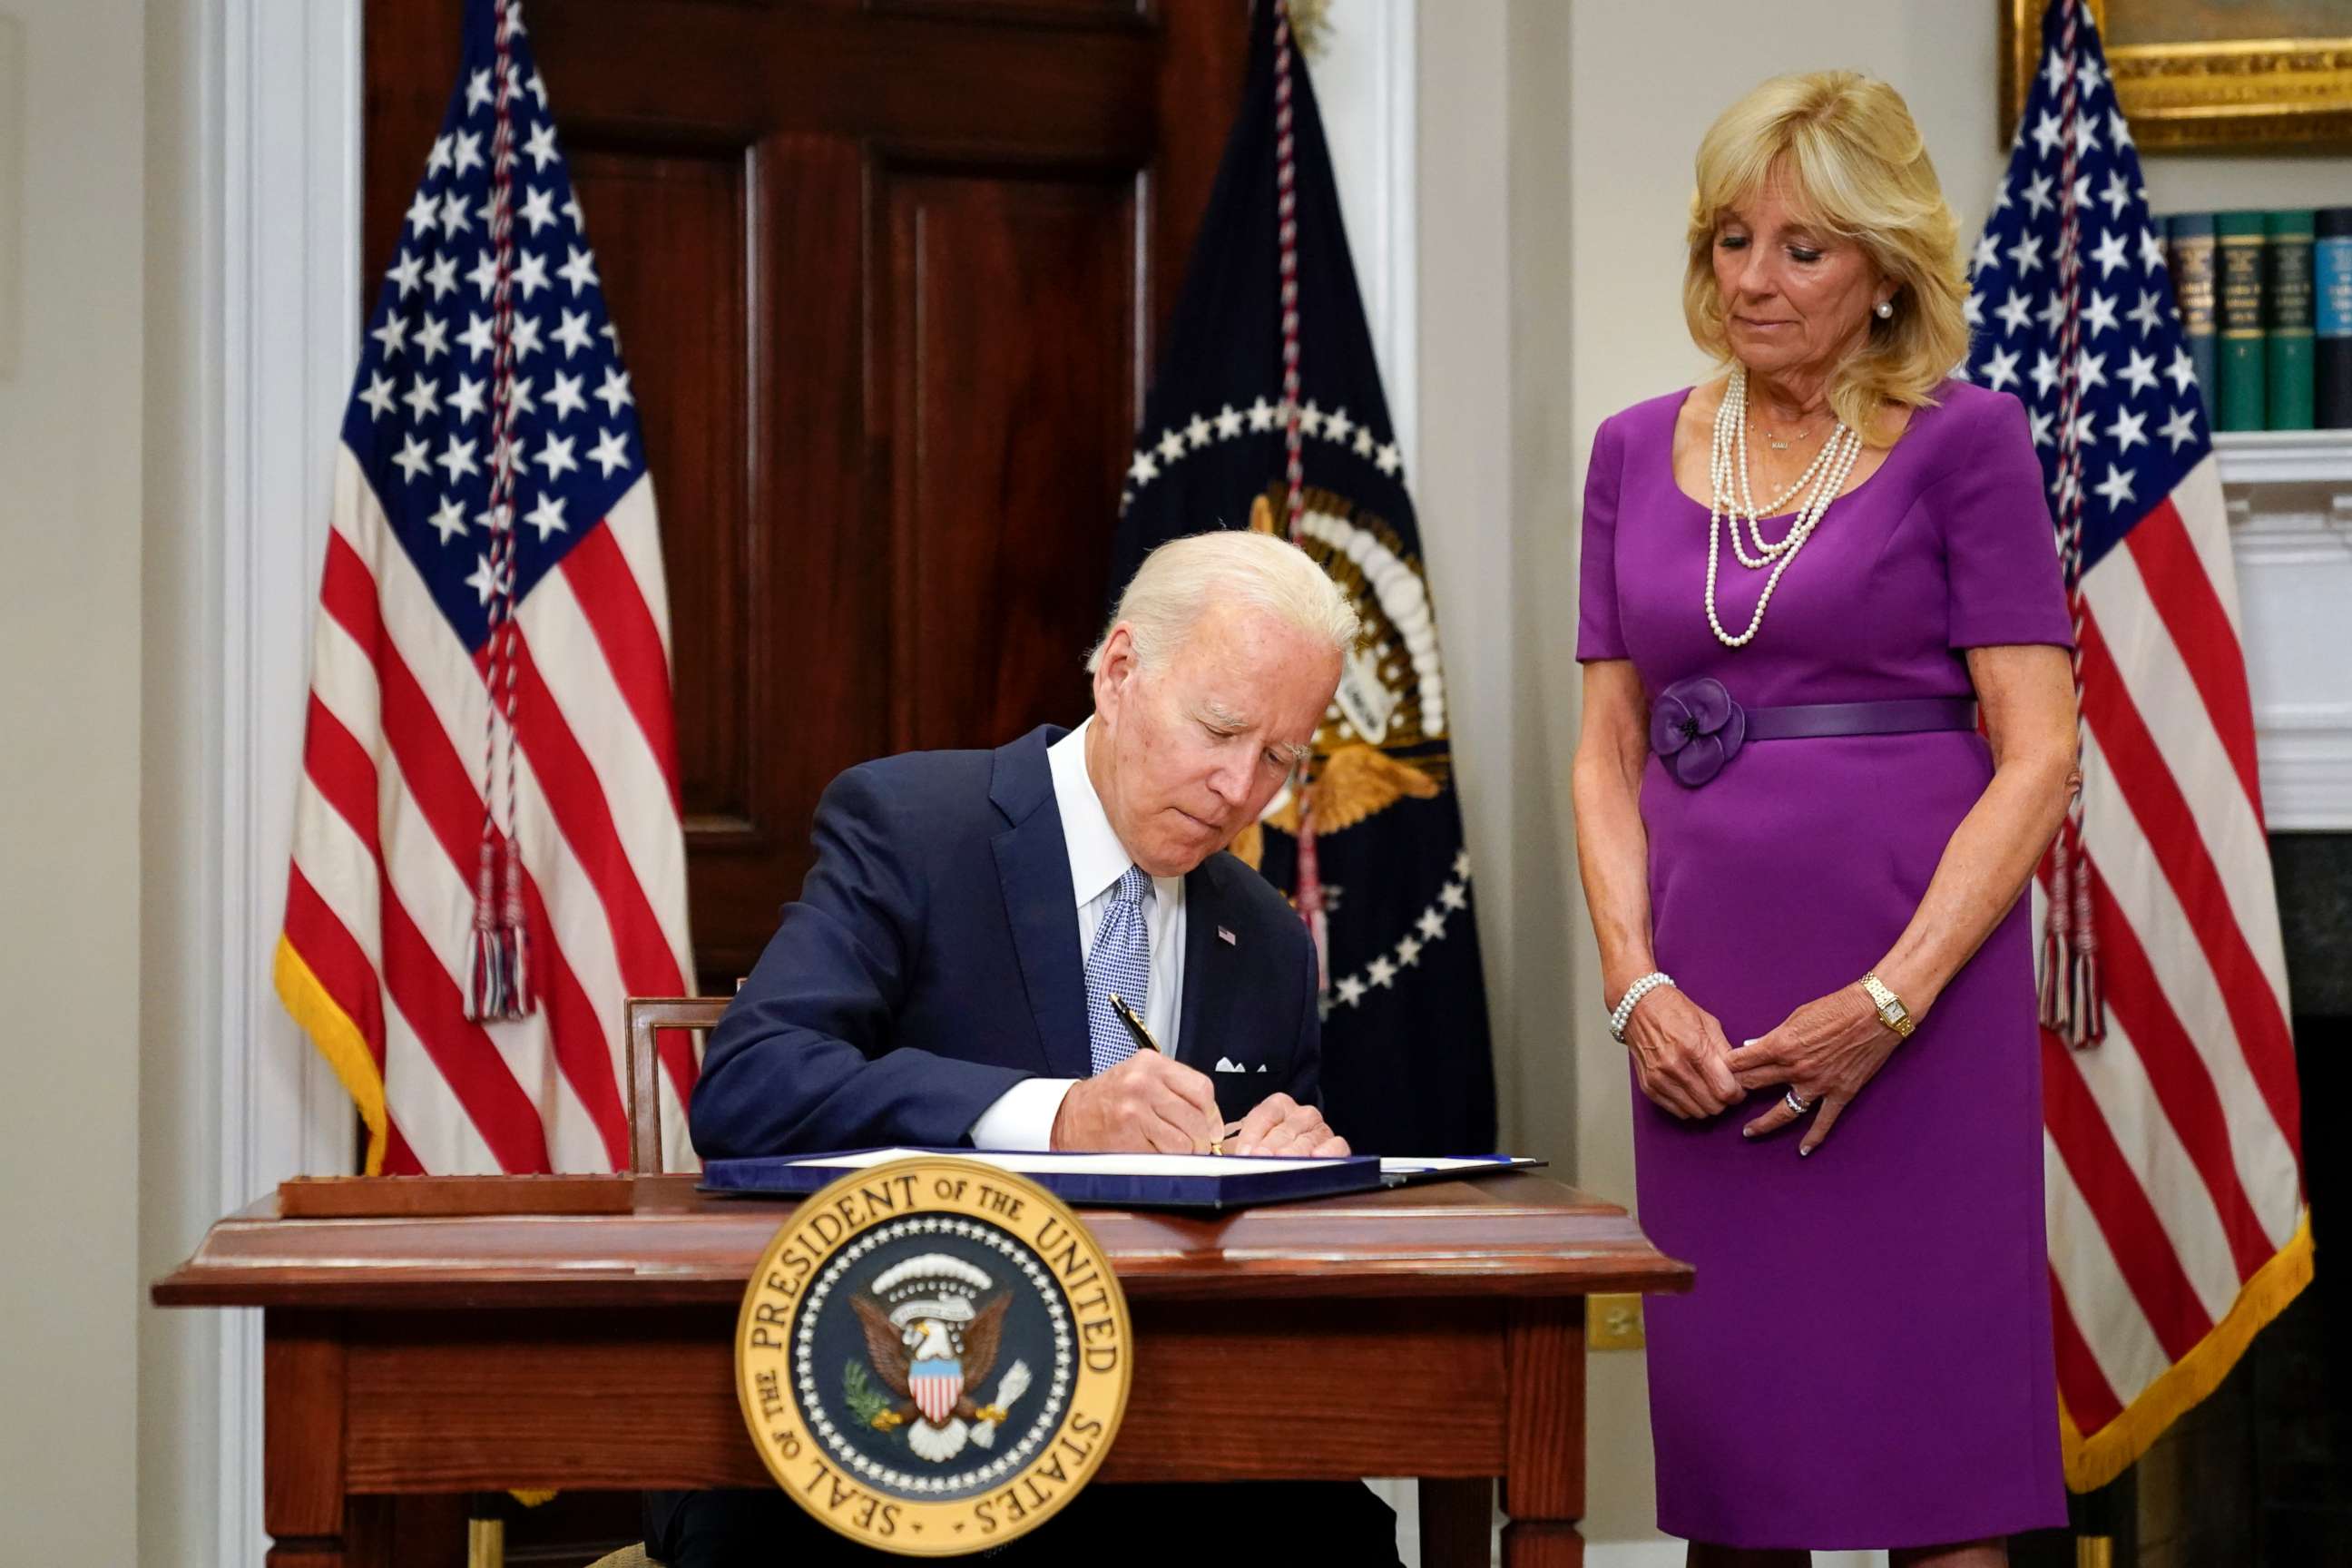 PHOTO: President Joe Biden signs into law S. 2938, the Bipartisan Safer Communities Act gun safety bill, in the Roosevelt Room of the White House in Washington, June 25, 2022.